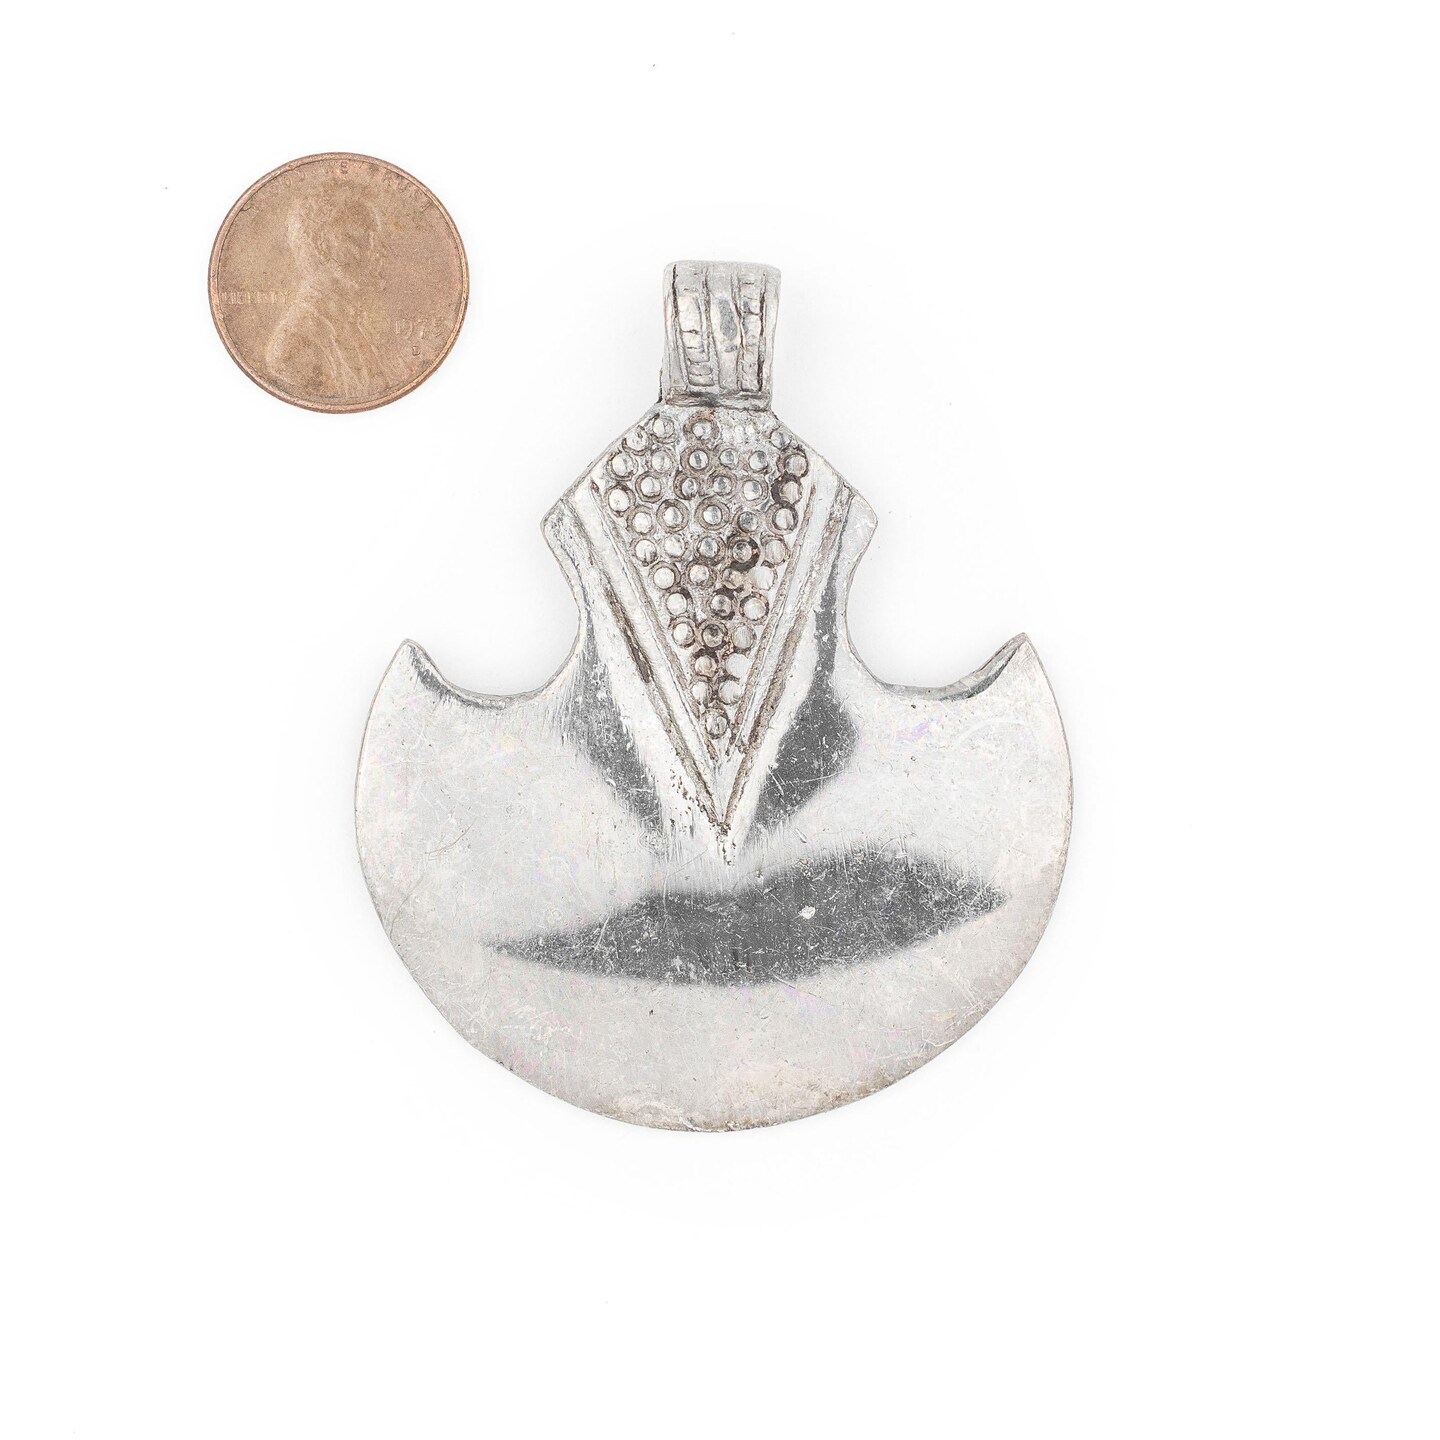 TheBeadChest Silver Half Moon Tuareg Shield Pendant (63x51mm): North African Tribal Berber Moroccan Sahara Pendant for Jewelry